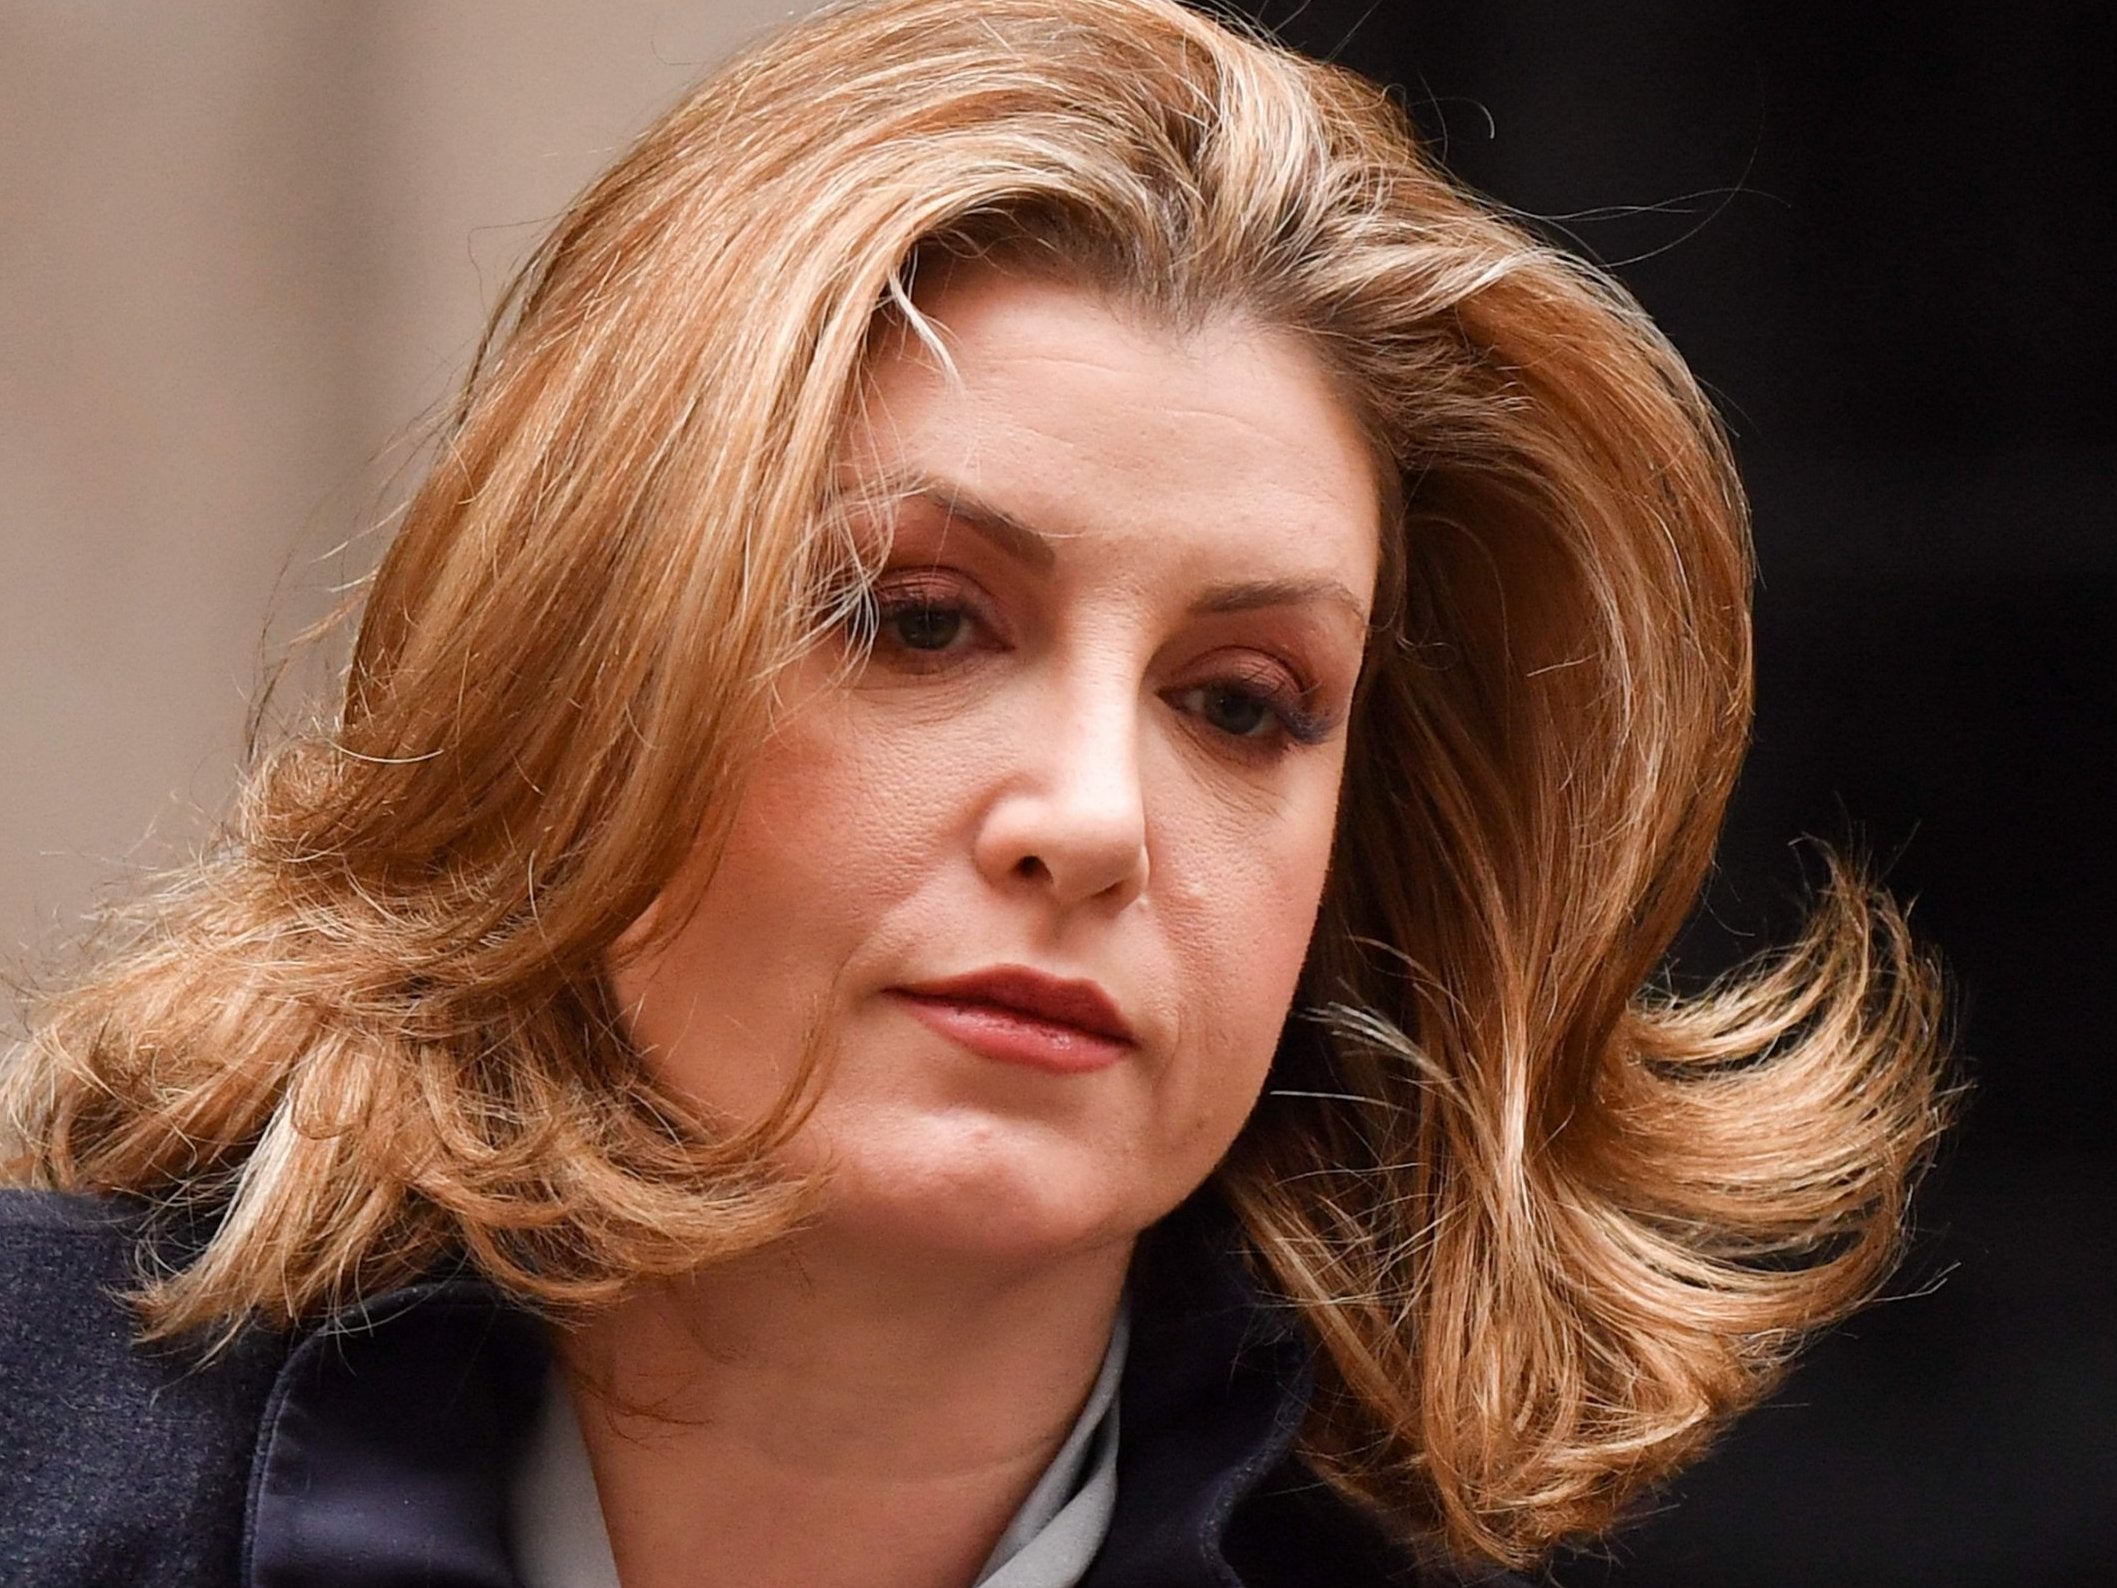 Mordaunt: ‘We passionately believe we can create an Aids-free future for the world’